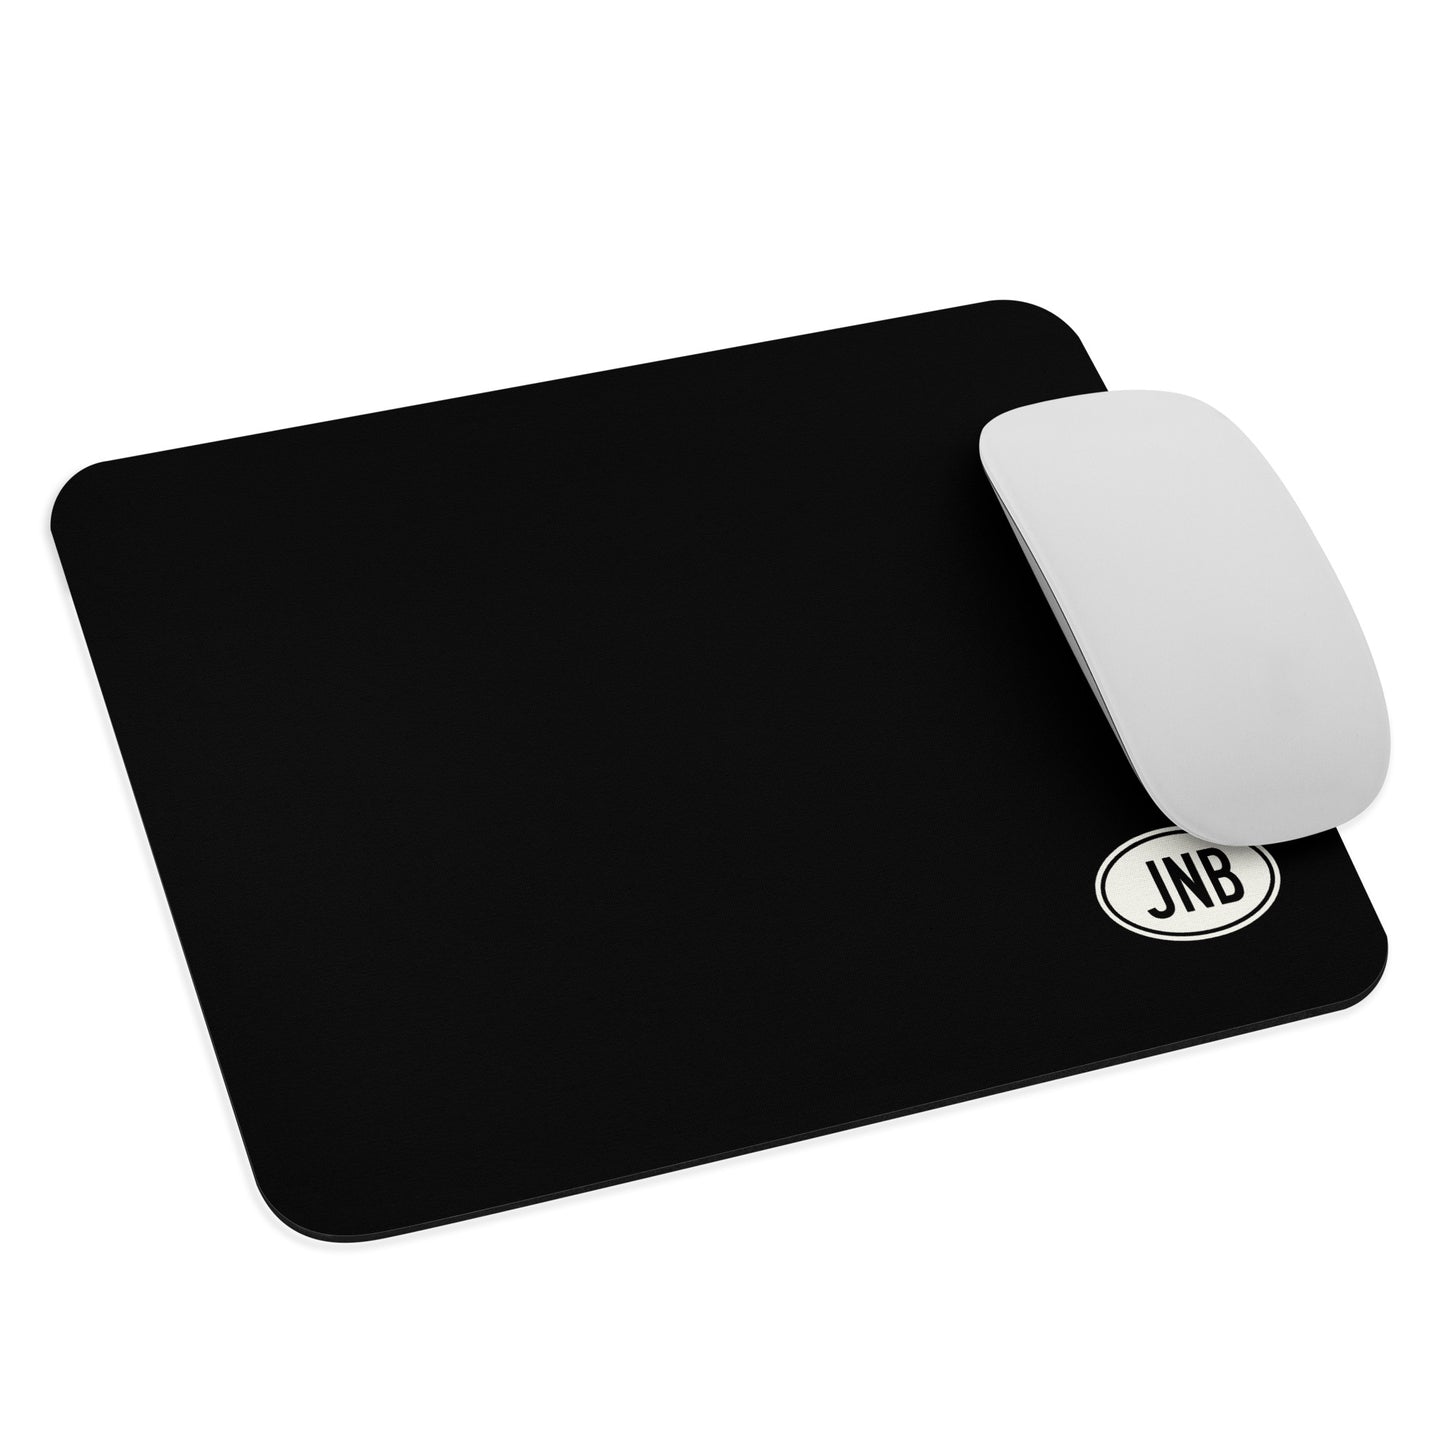 Unique Travel Gift Mouse Pad - White Oval • JNB Johannesburg • YHM Designs - Image 03